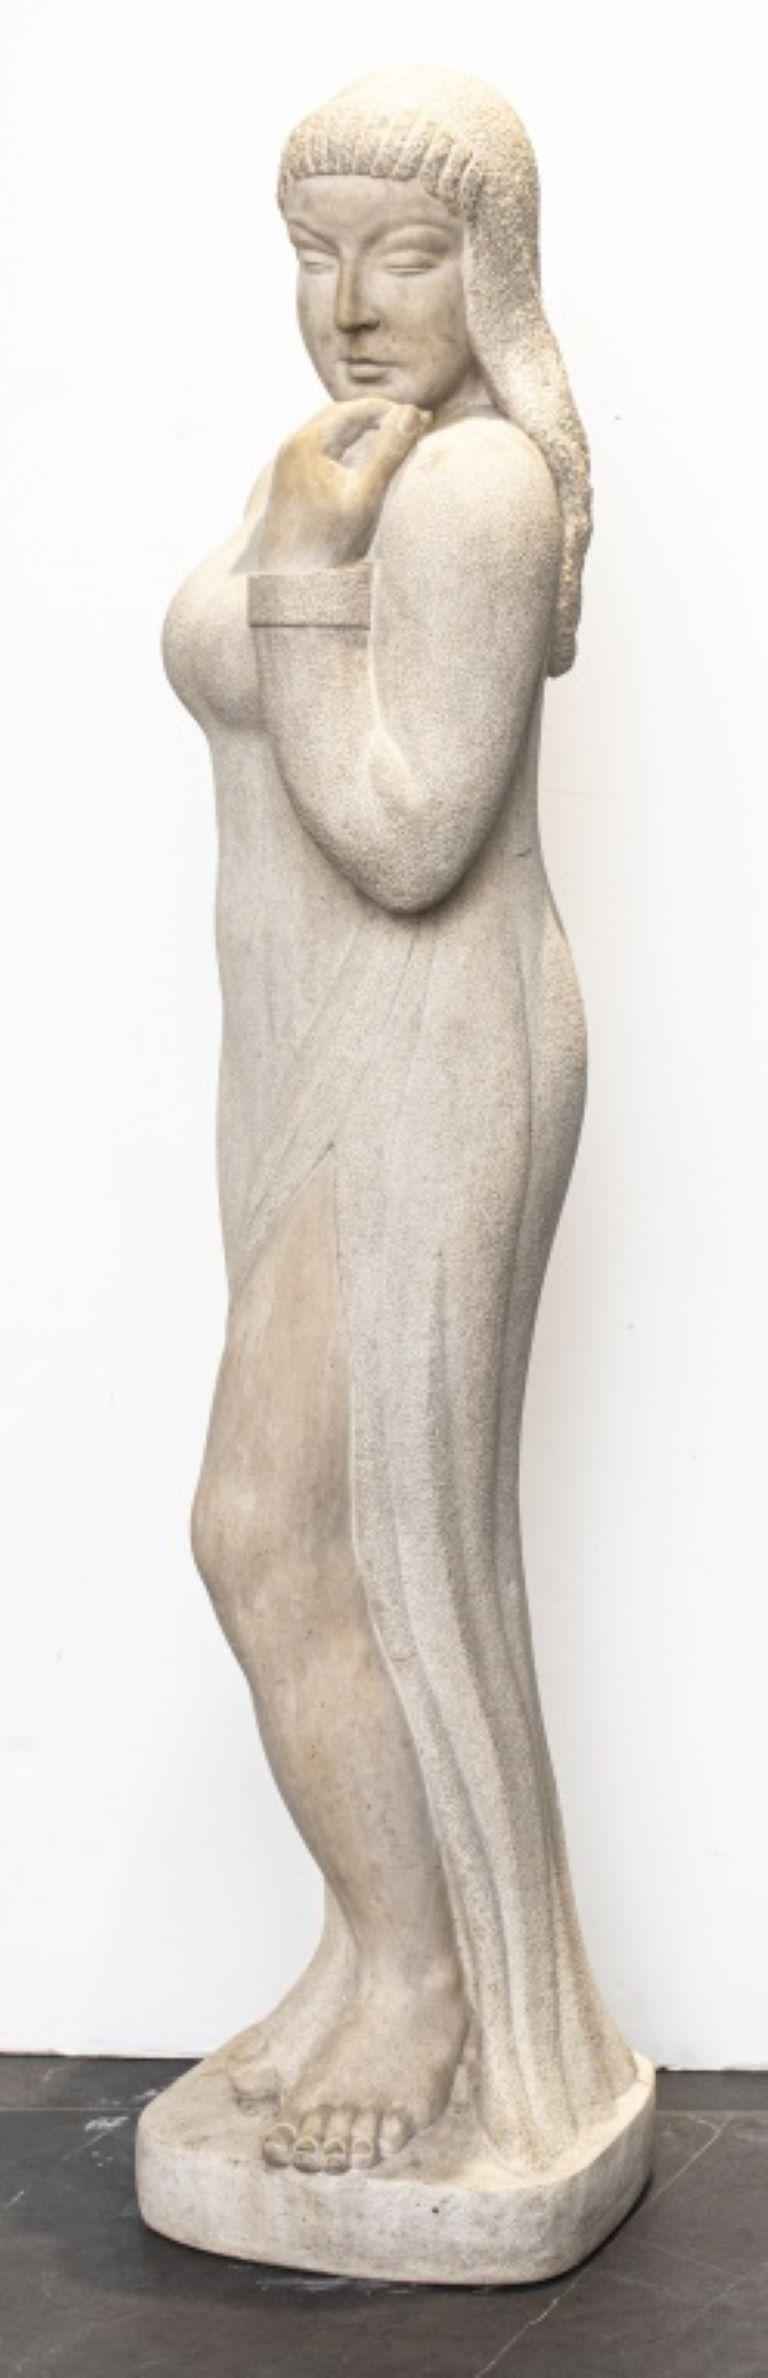 Kahan Signed Carved Stone Woman Sculpture For Sale 4